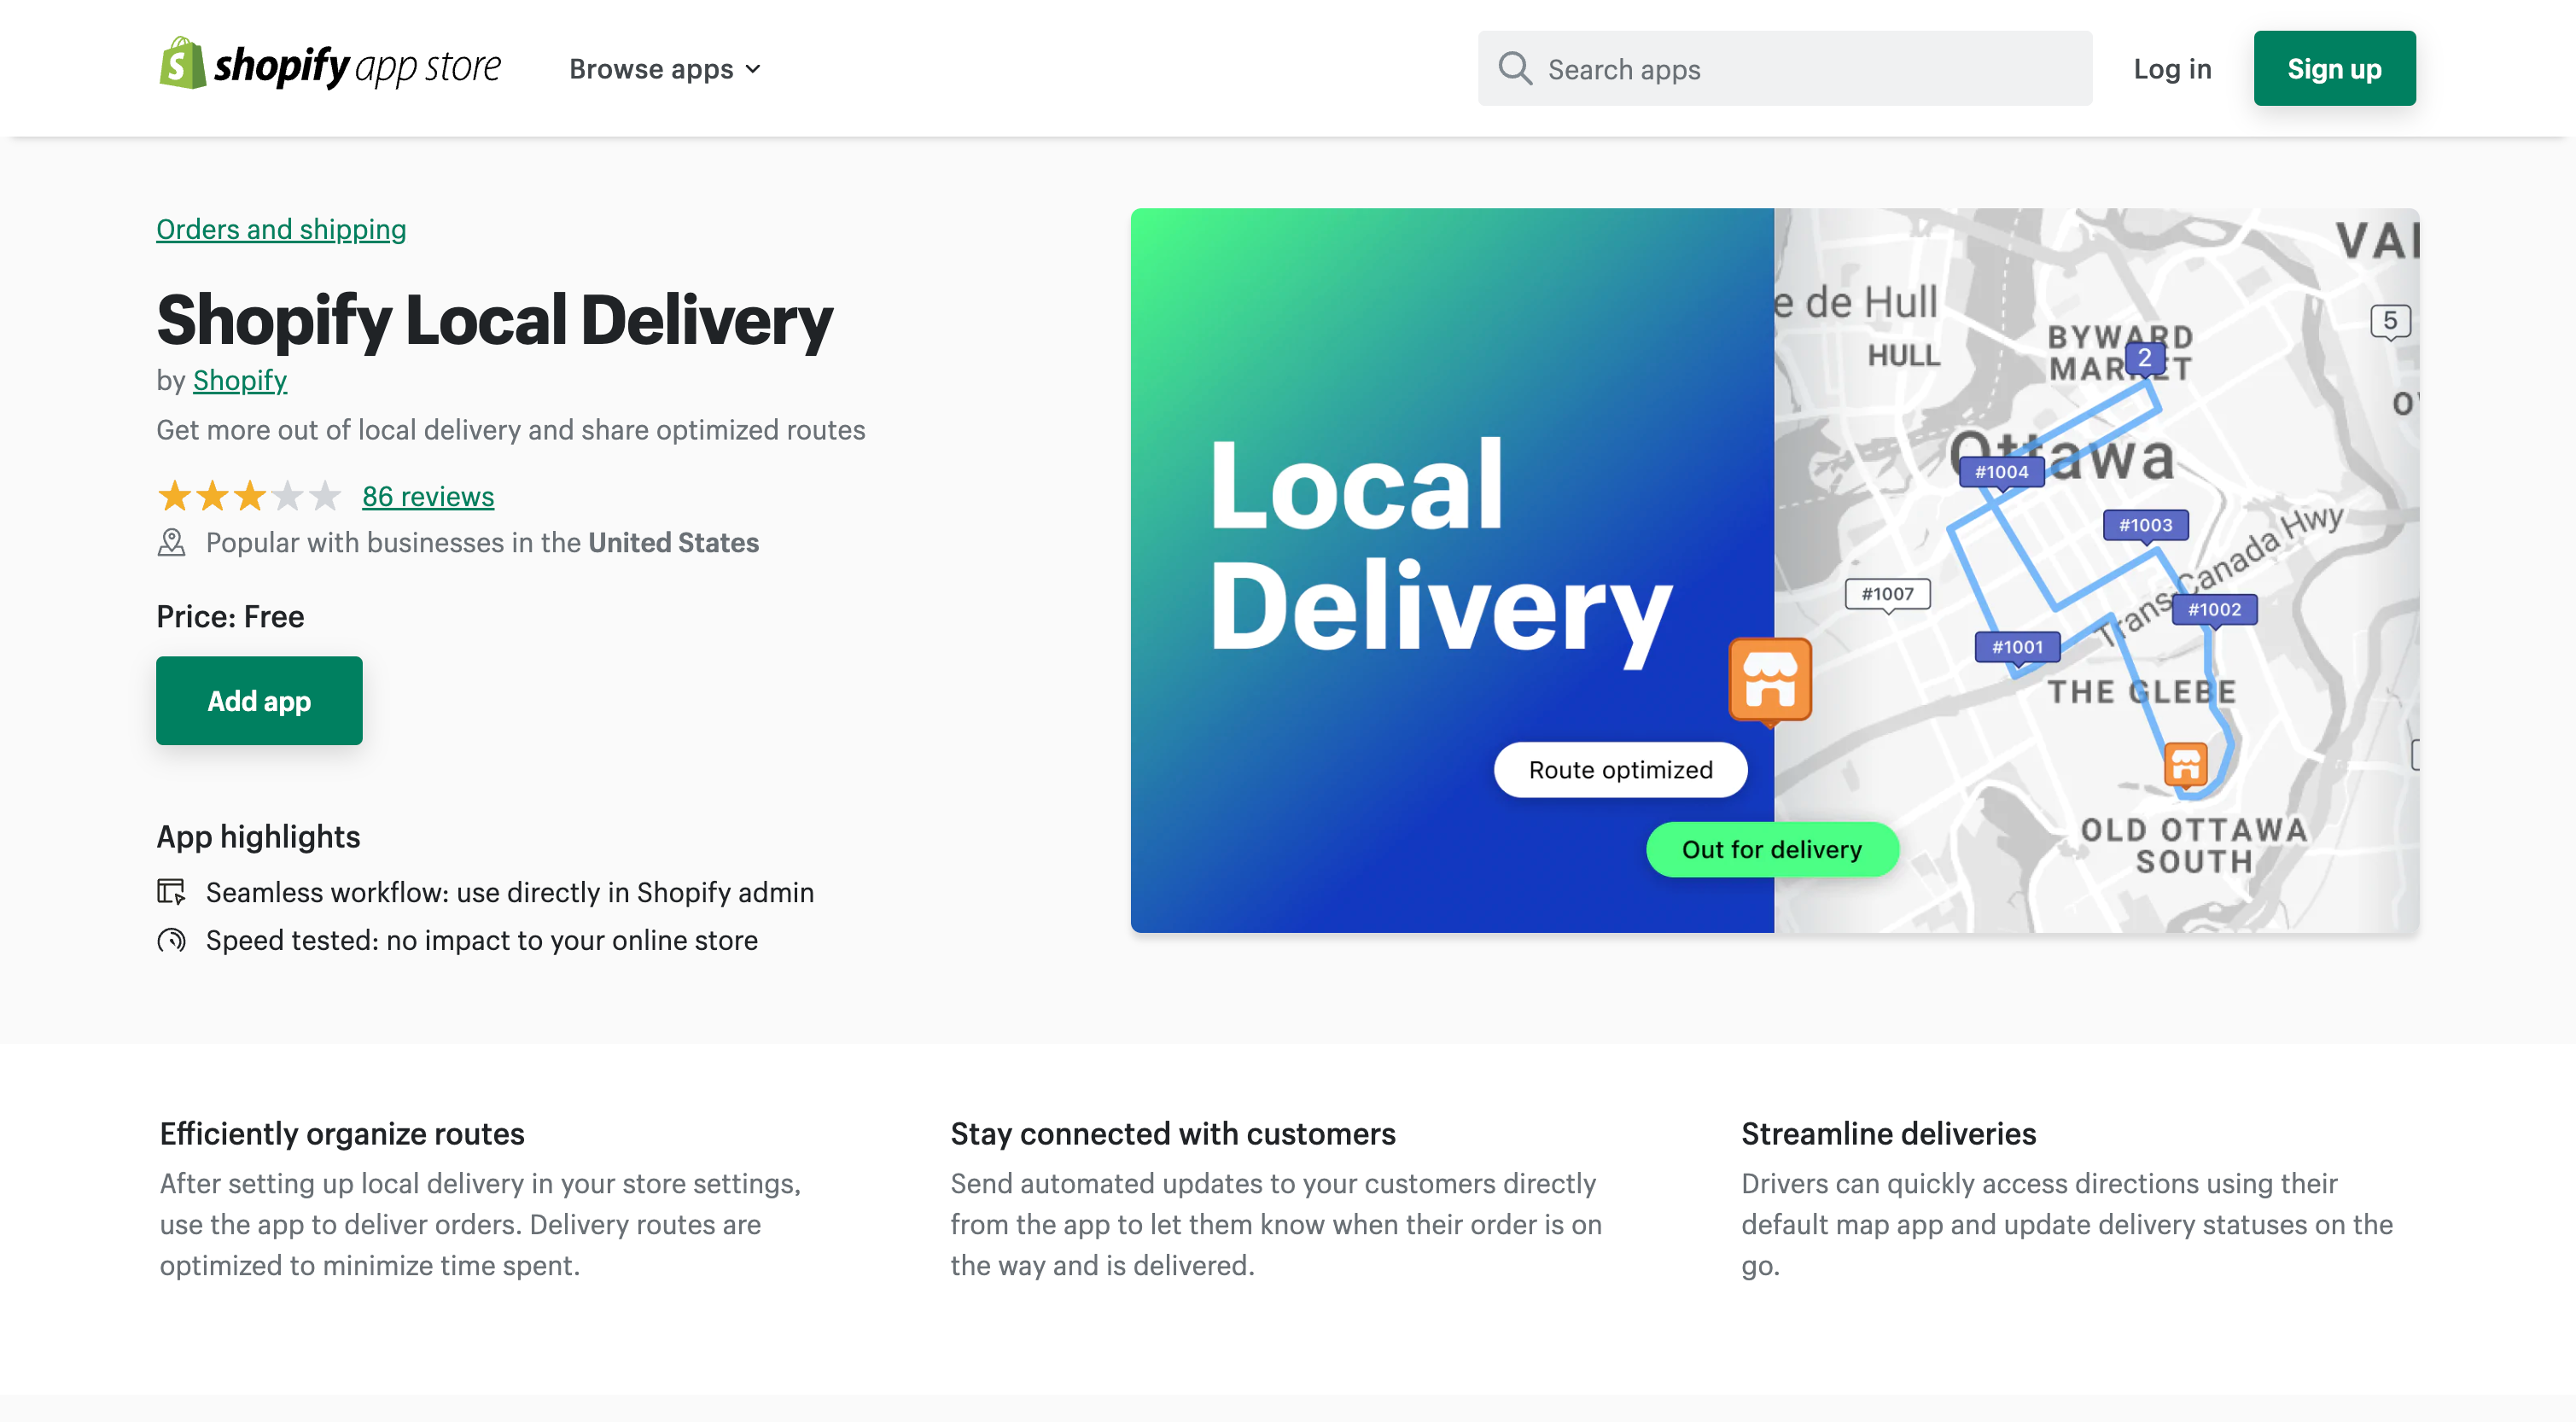 Shopify Local Delivery - Get more out of local delivery and share optimized routes | Shopify App Store